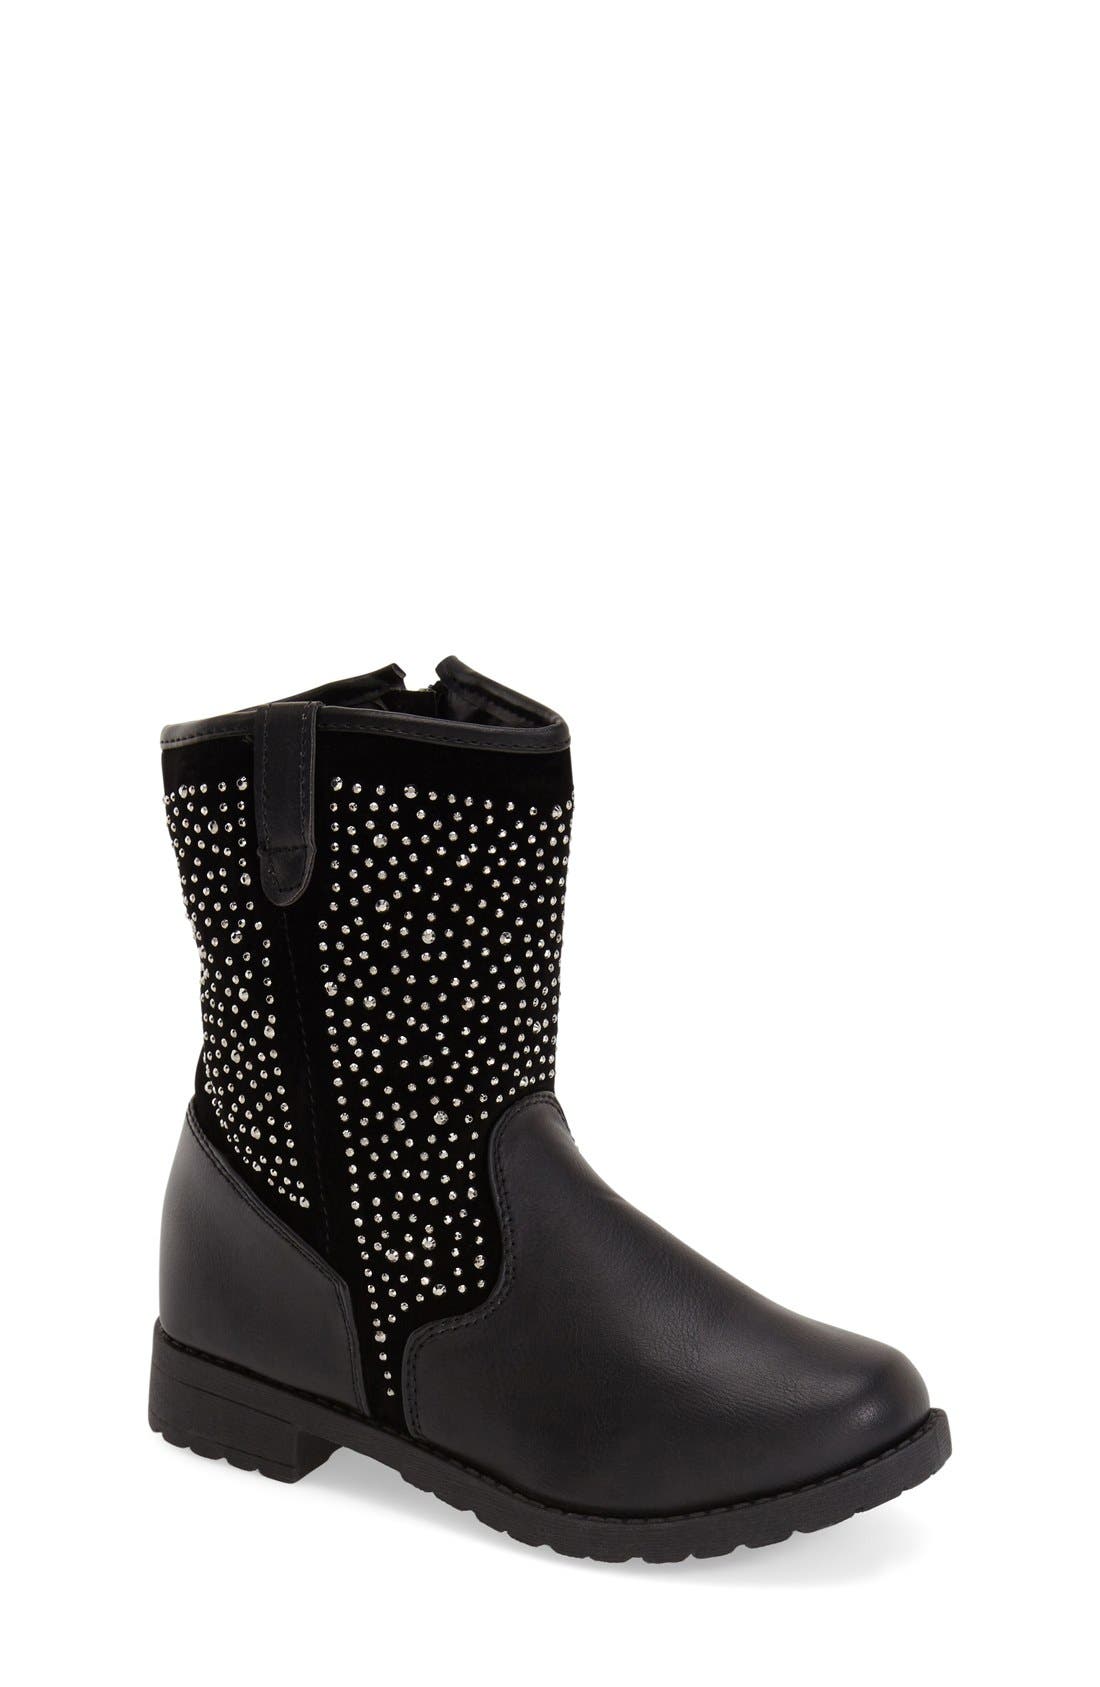 moto boots with studs